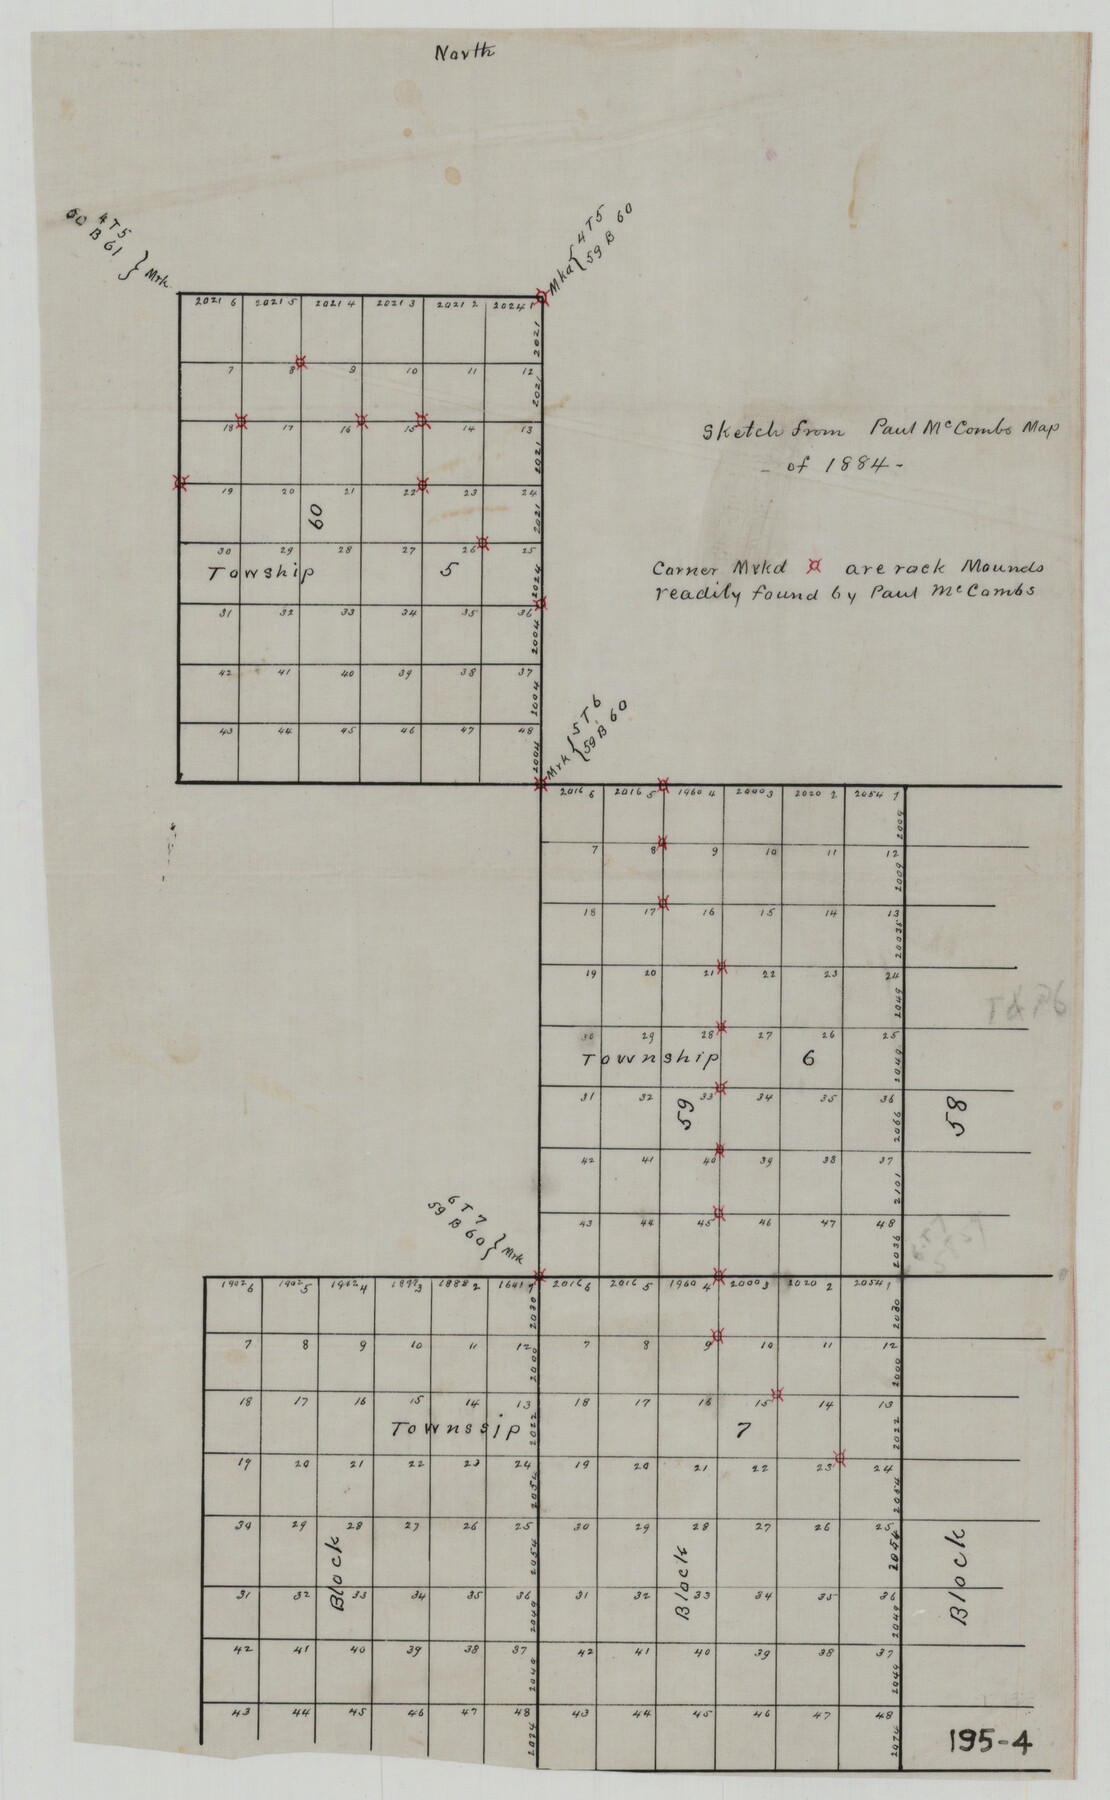 91774, [Sketch from Paul McCombs Map of 1884, showing T. & P. Township 5, Block 60, Township 6, Block 59, and Township 7, Blocks 59 and 60], Twichell Survey Records